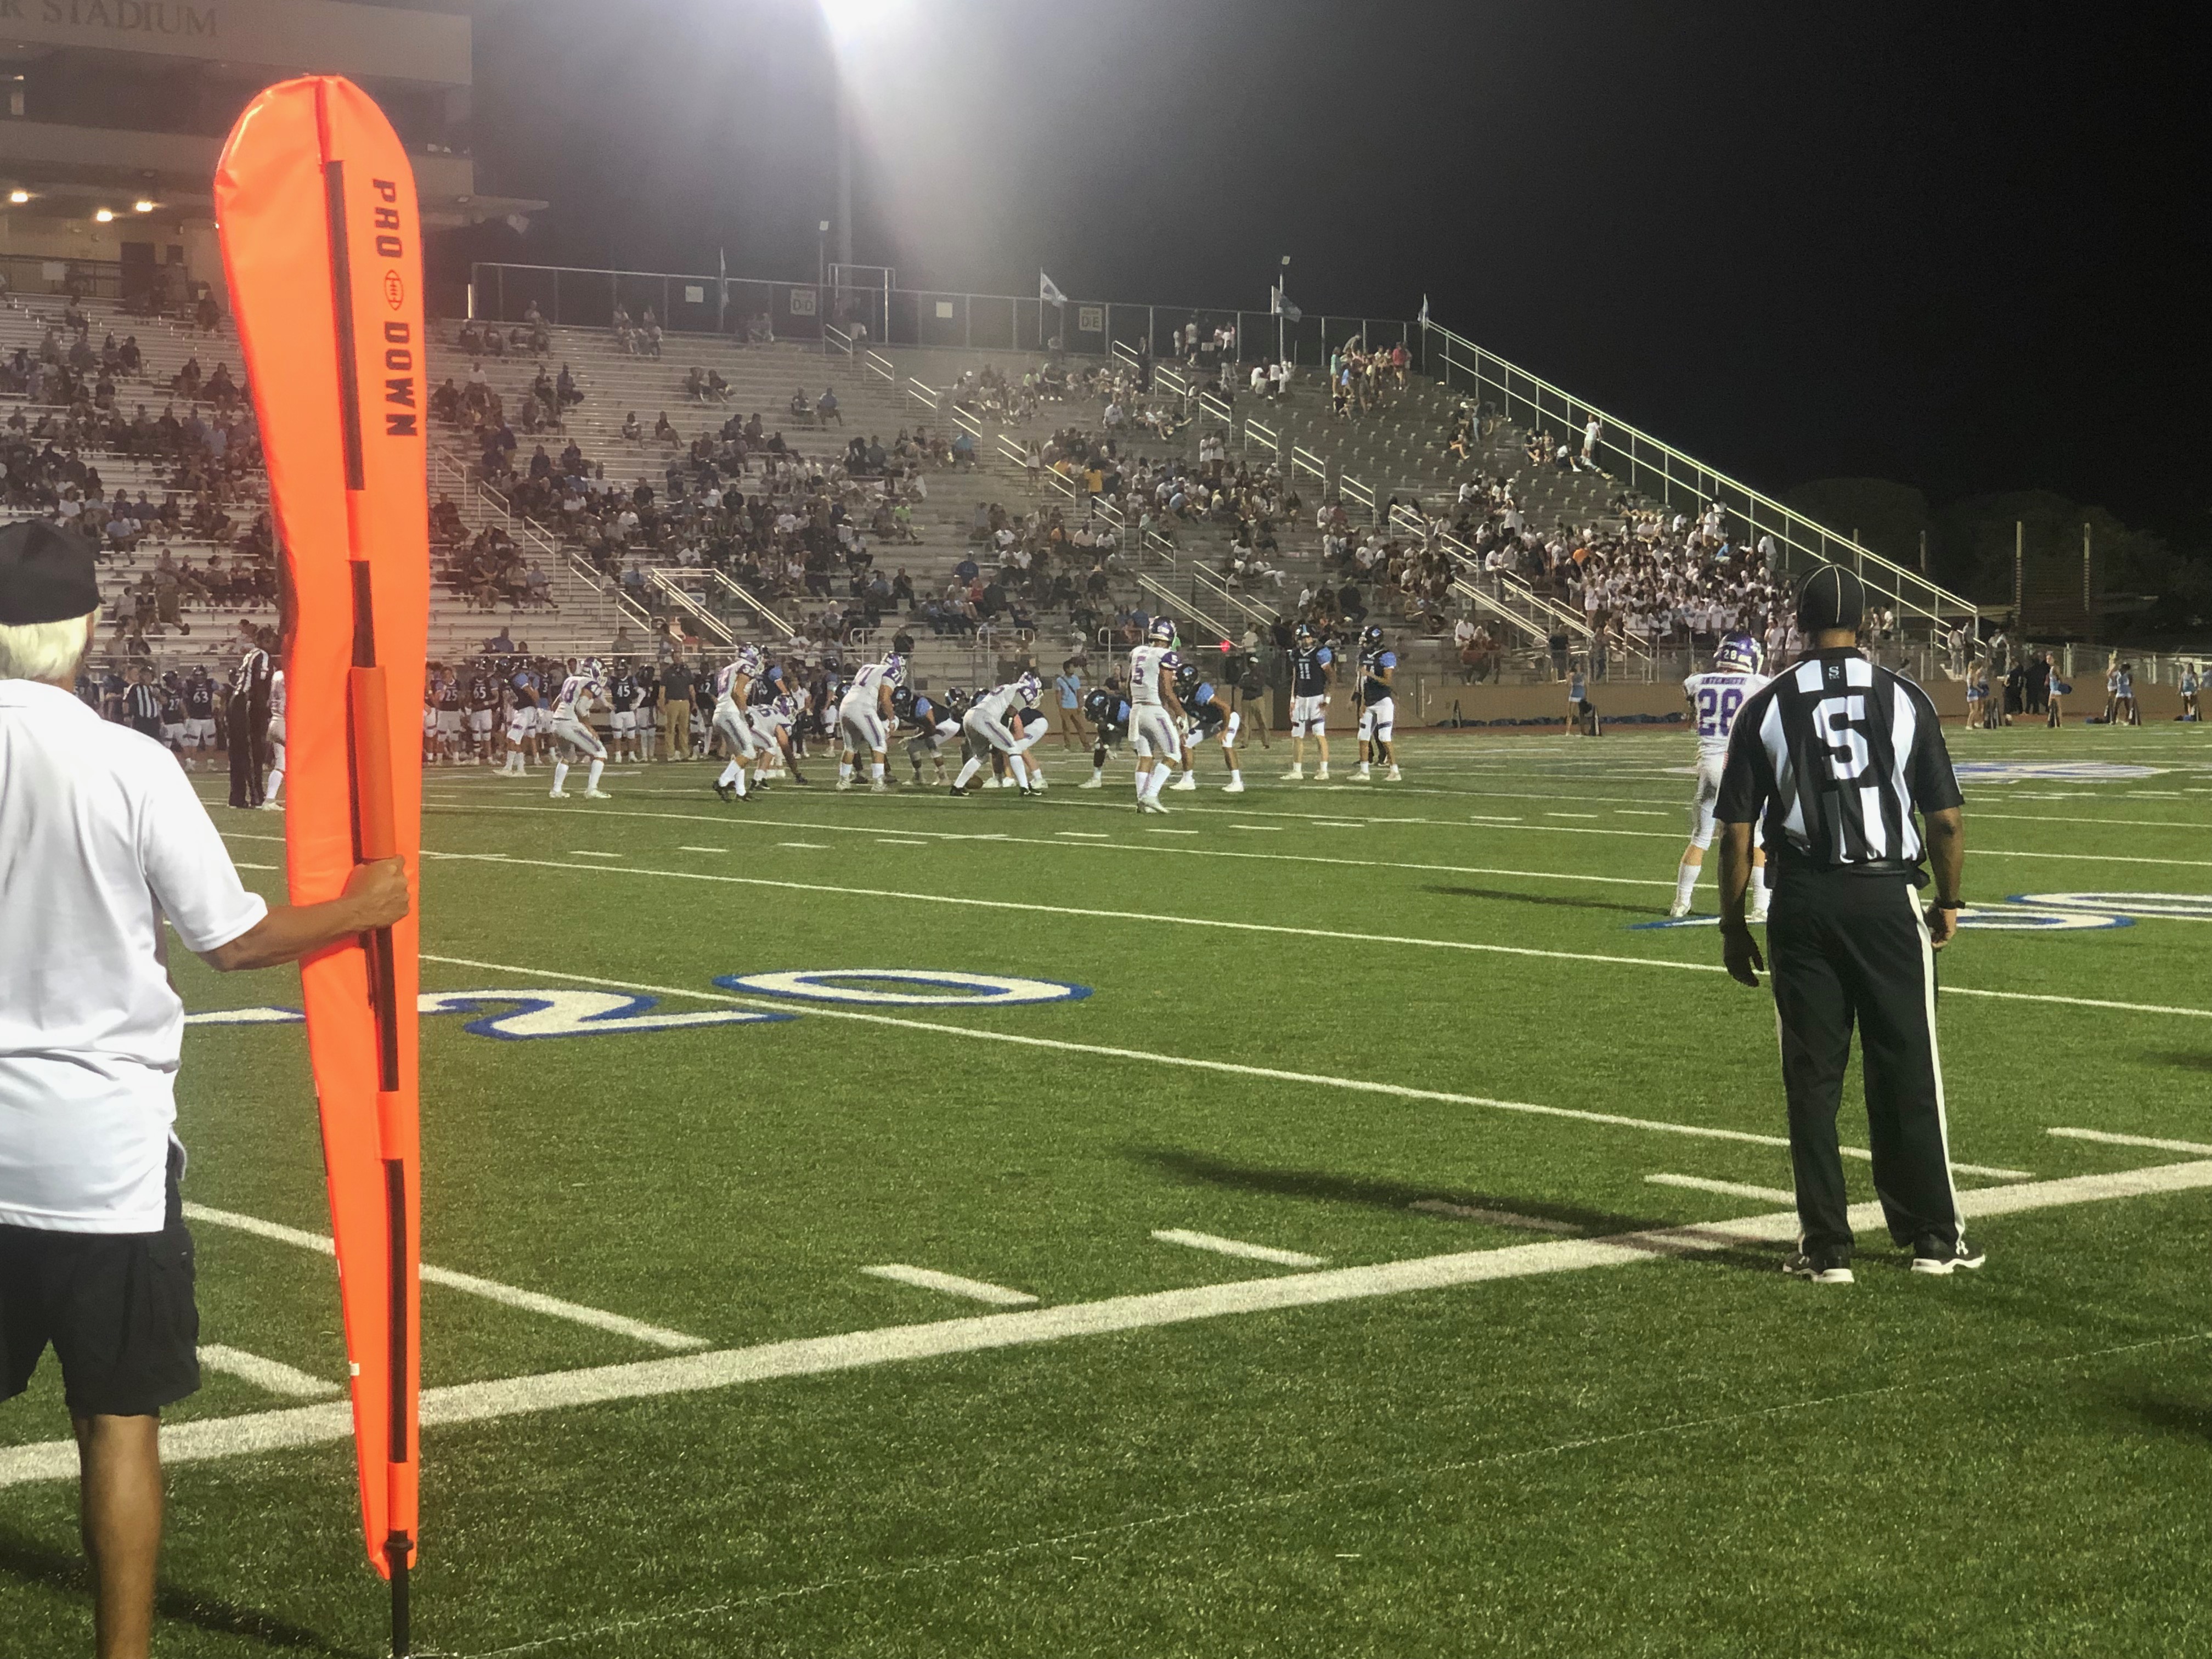 Pre-snap of a Jaguar play on the Rattler 36 yard-line. The Rattler defense is getting set on the line of scrimmage. The first down marker and a referee are visible in the picture watching the play.